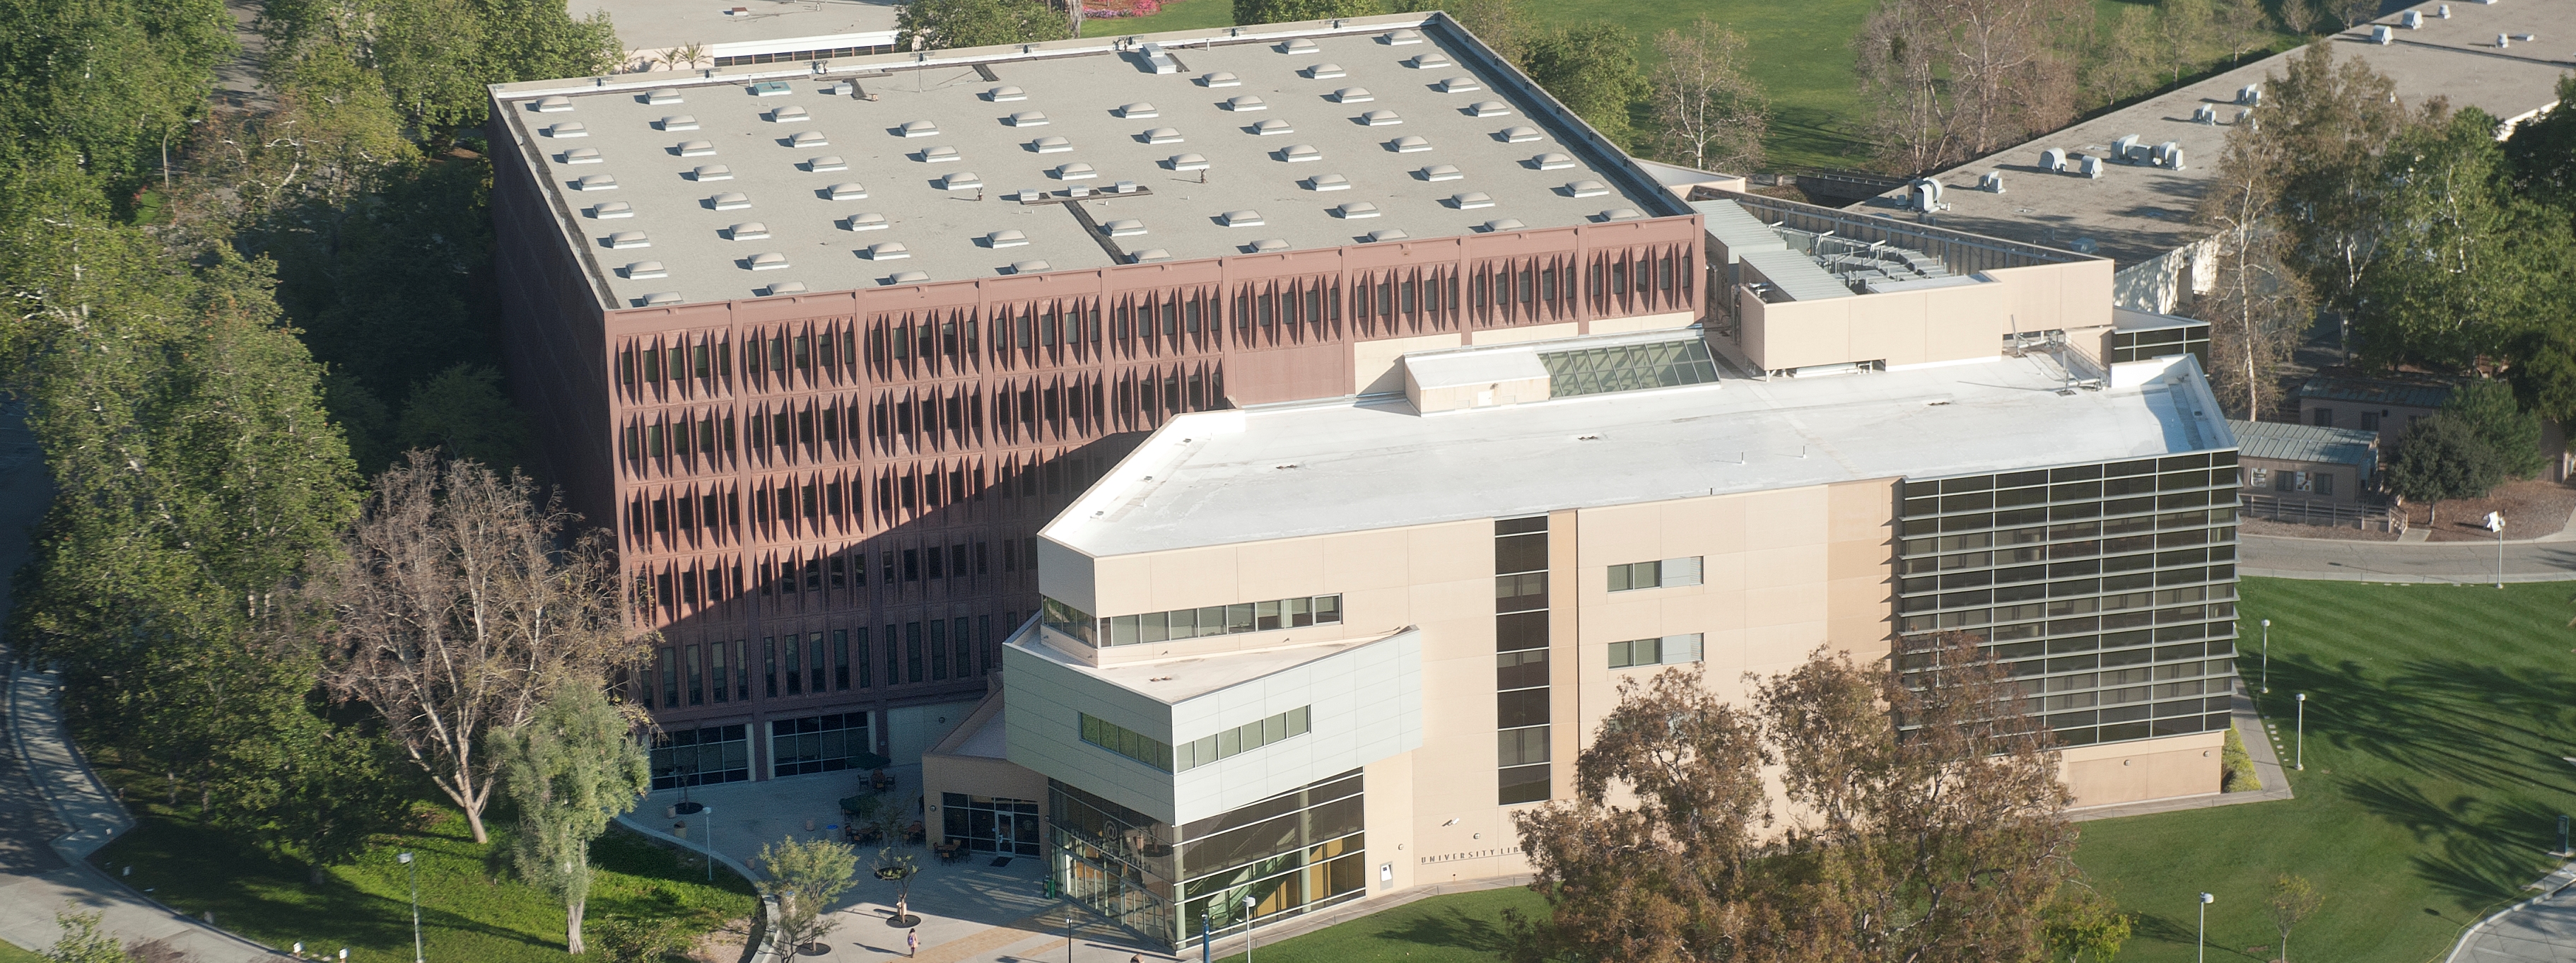 aerial view of university library